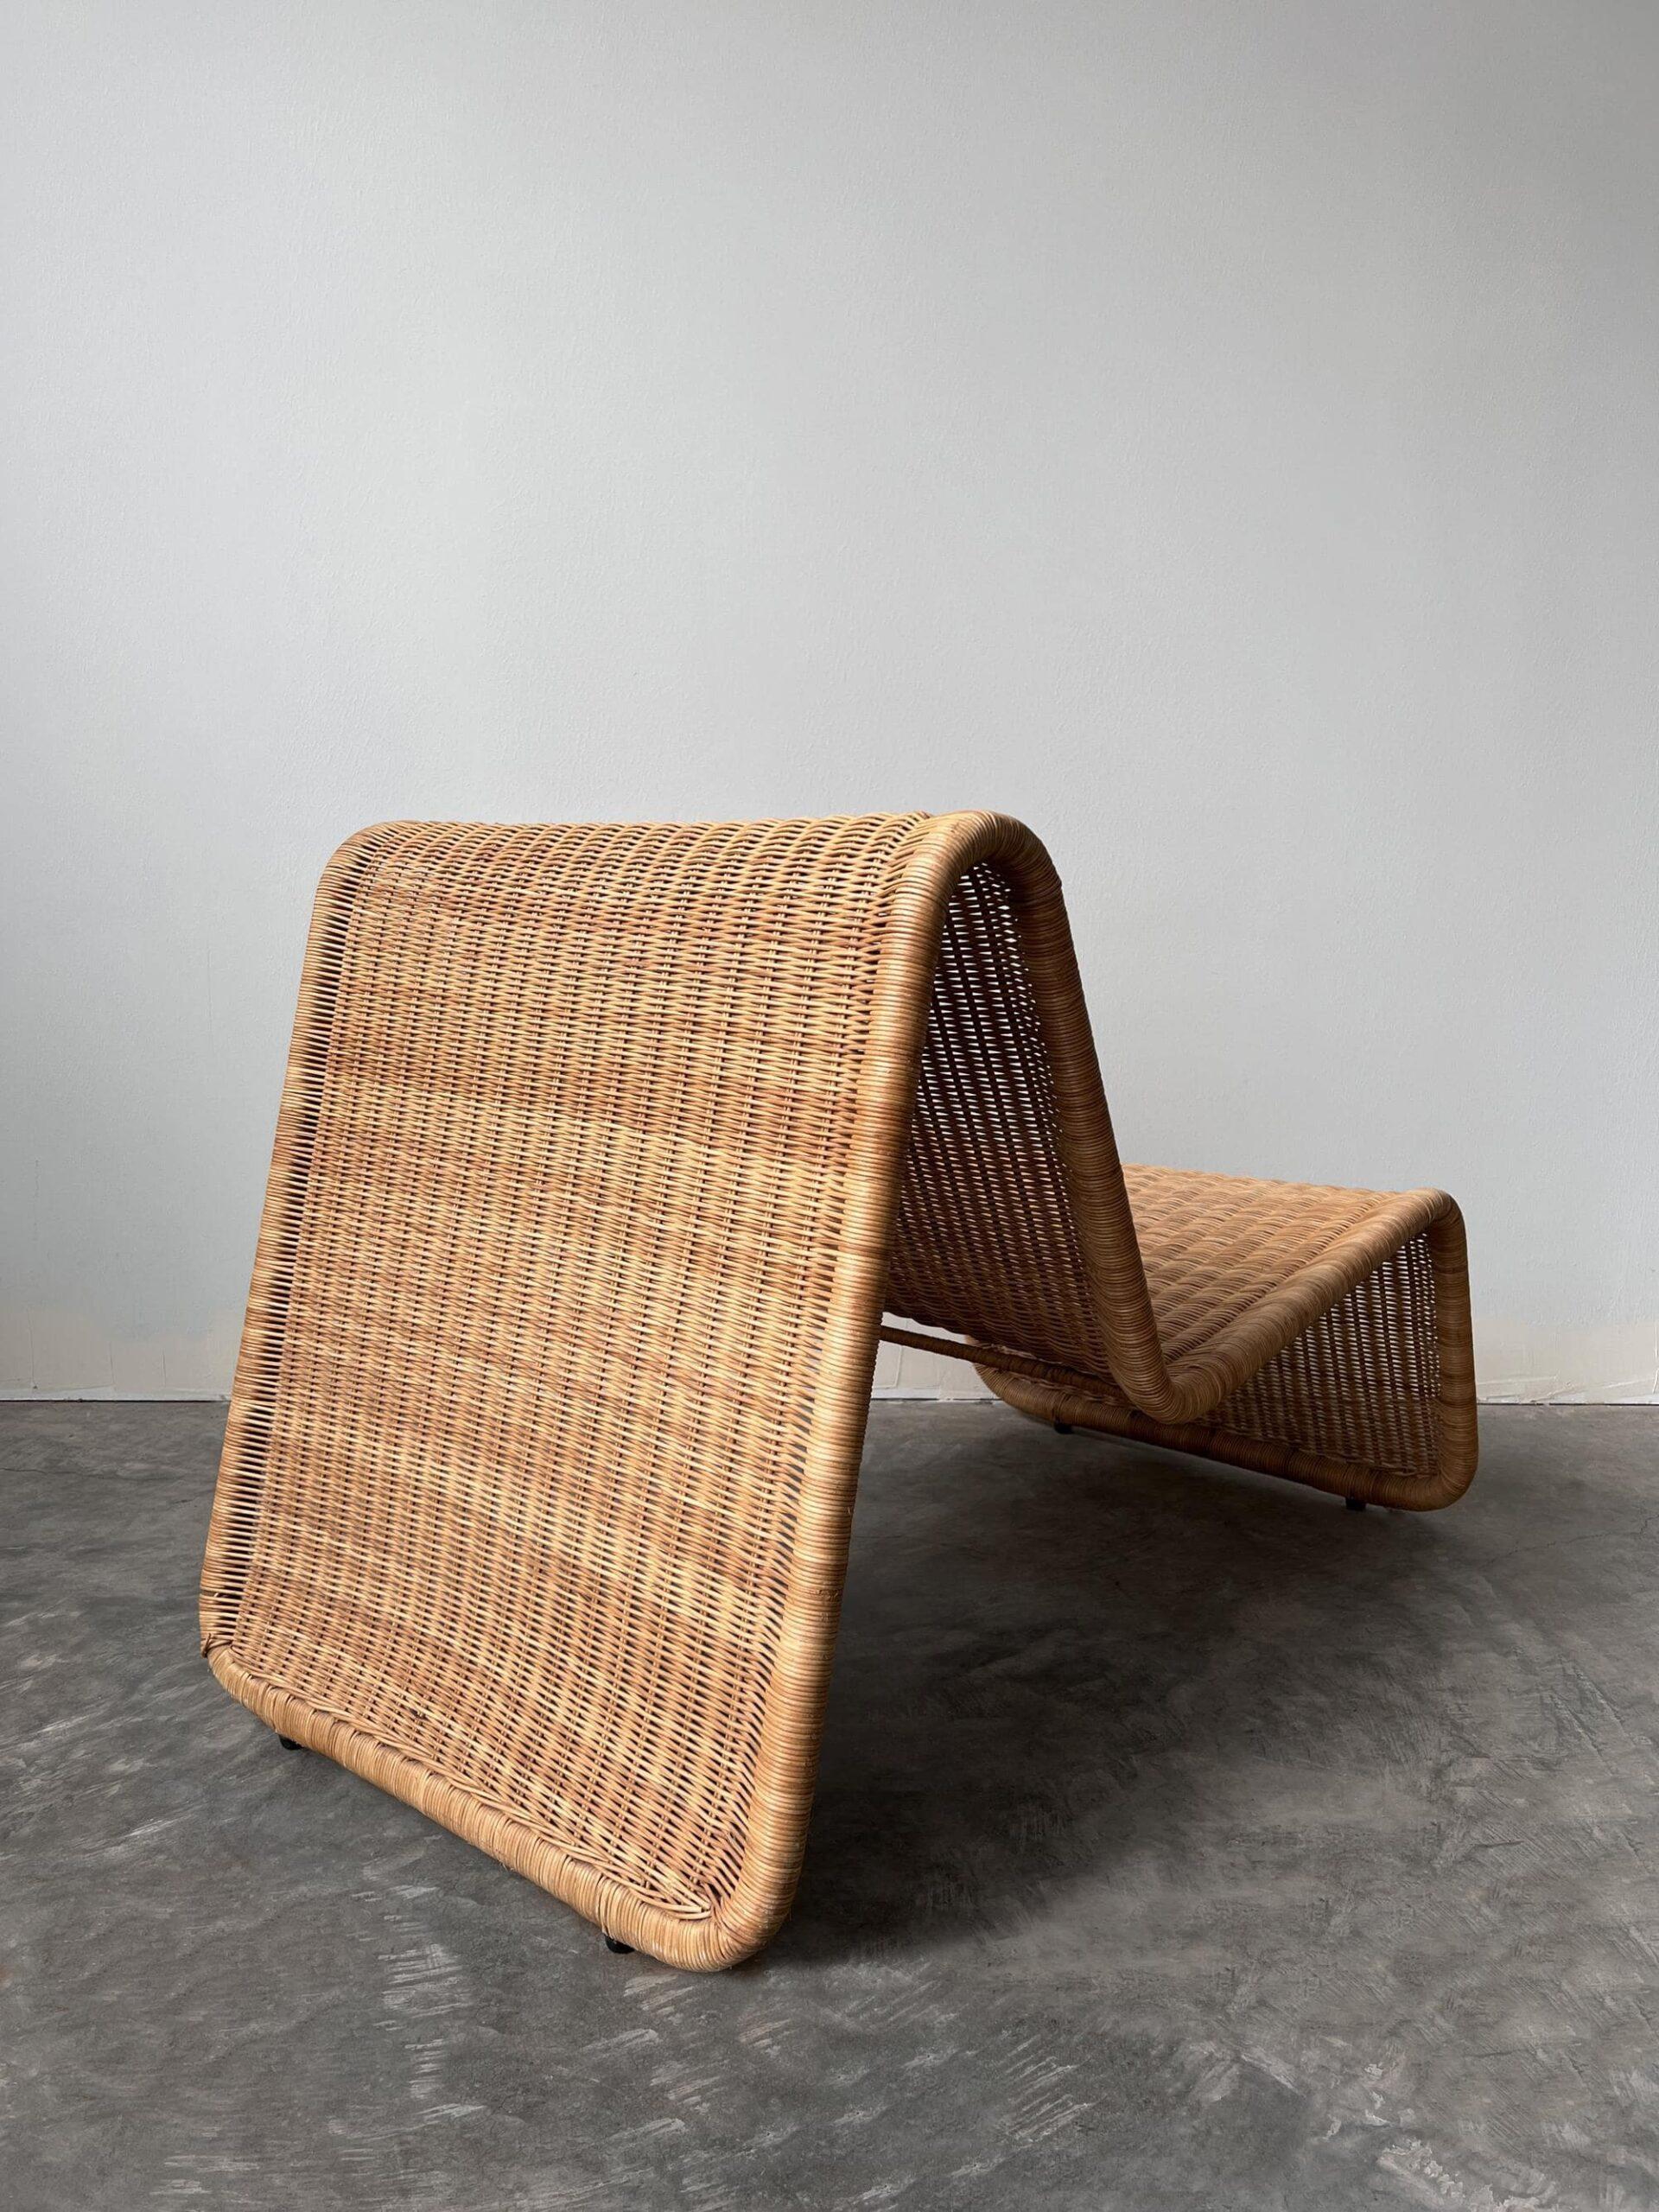 This playful P3 lounge chair by Tito Agnoli for Pierantonio Bonacina is made from wicker around a tubular steel frame.